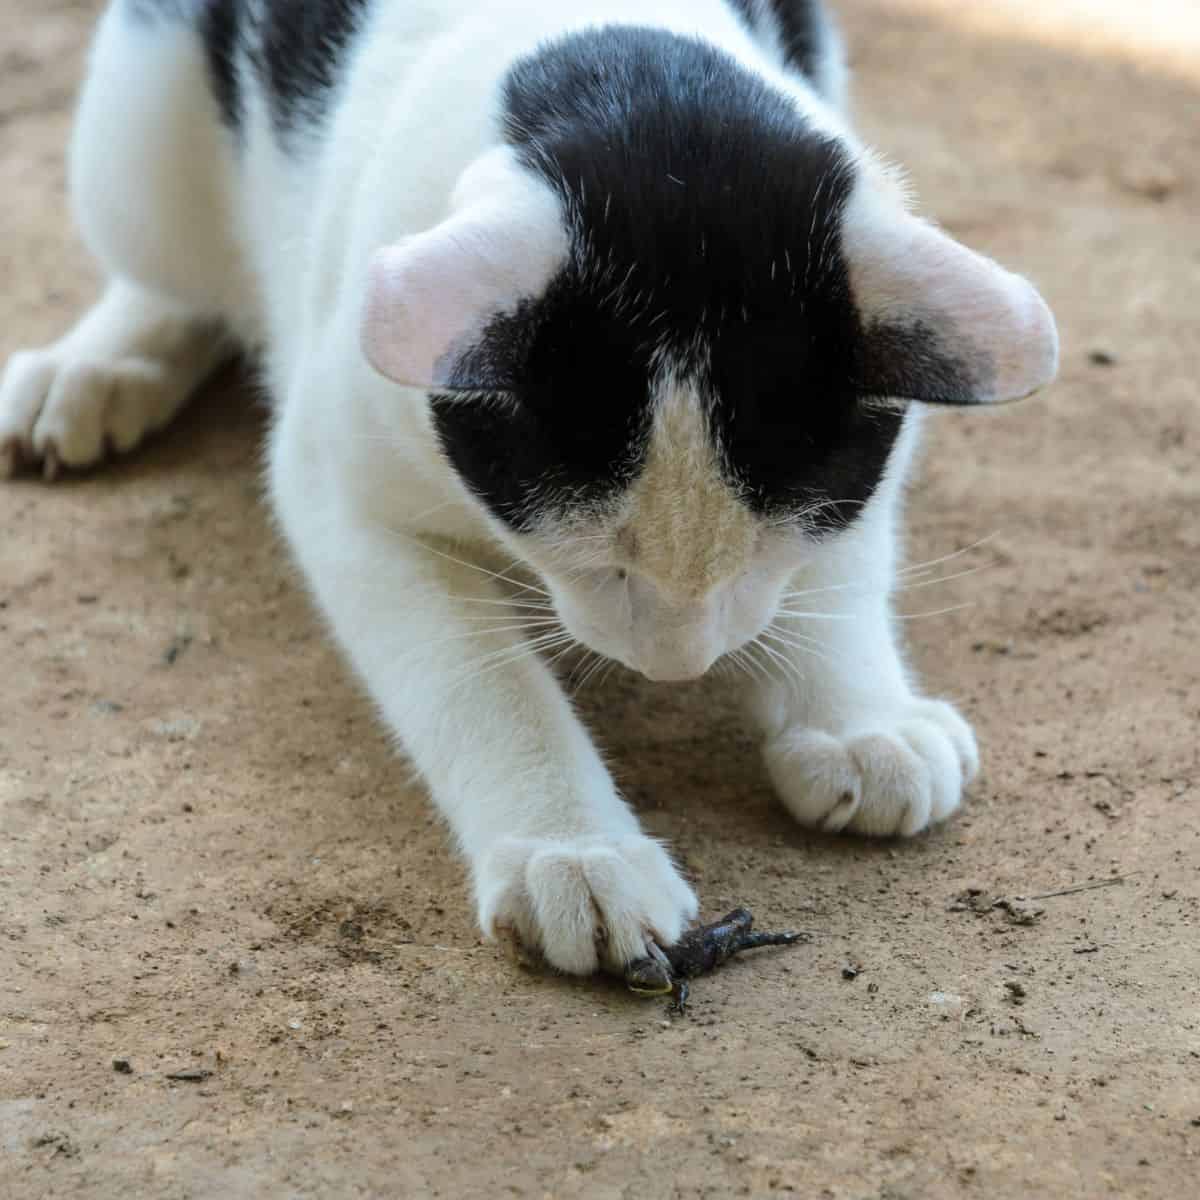 cat playing with insect